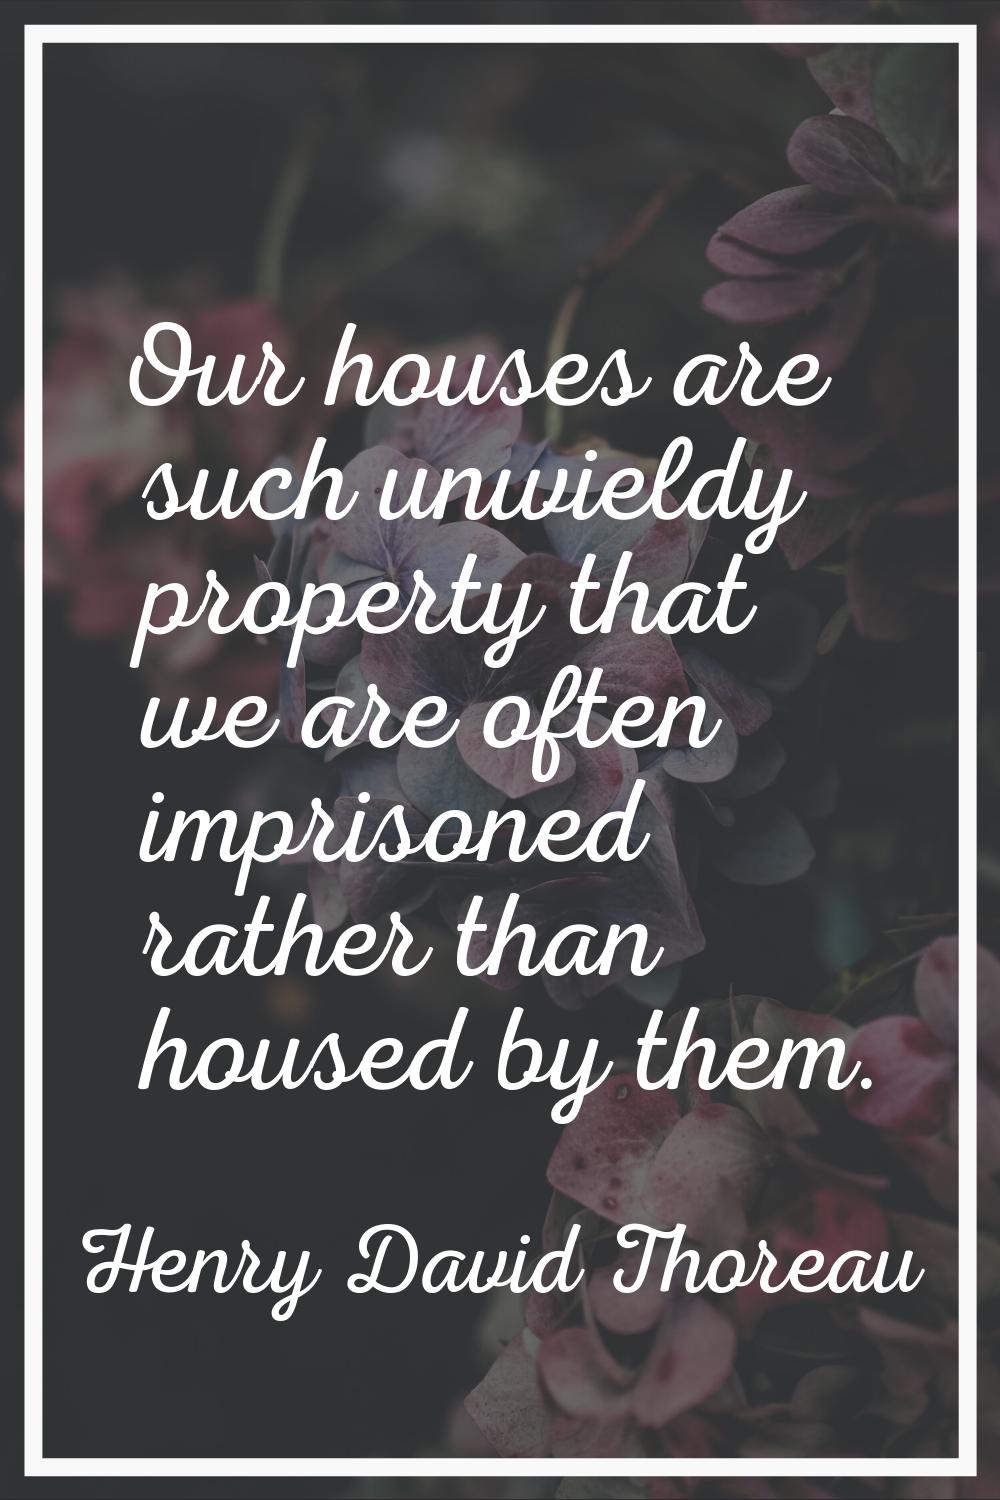 Our houses are such unwieldy property that we are often imprisoned rather than housed by them.